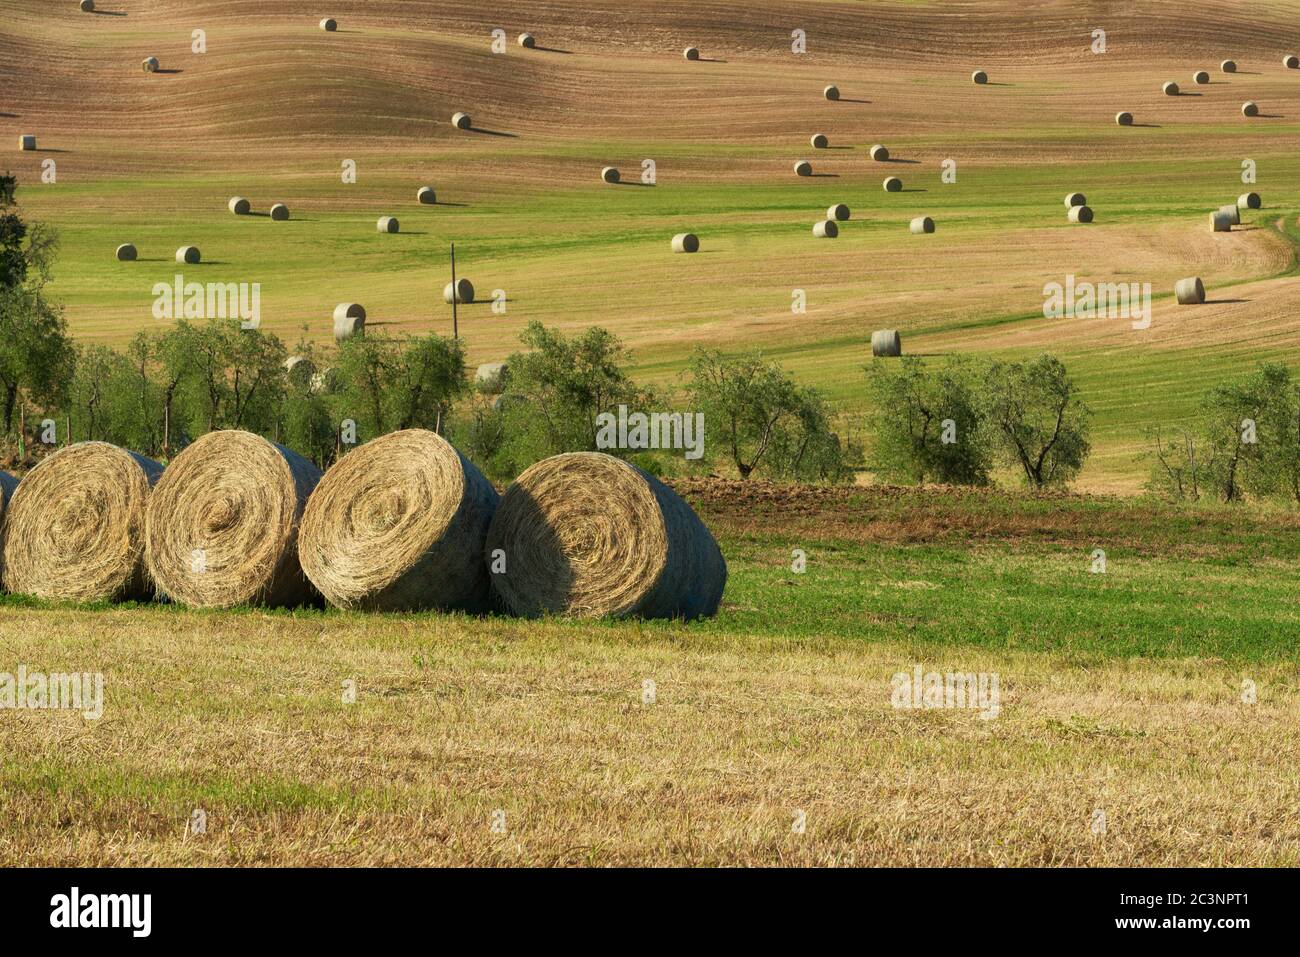 Beautiful countryside landscape near Siena in Tuscany, Italy. Round straw bales hay balls in harvested fields and blue sky. Stock Photo